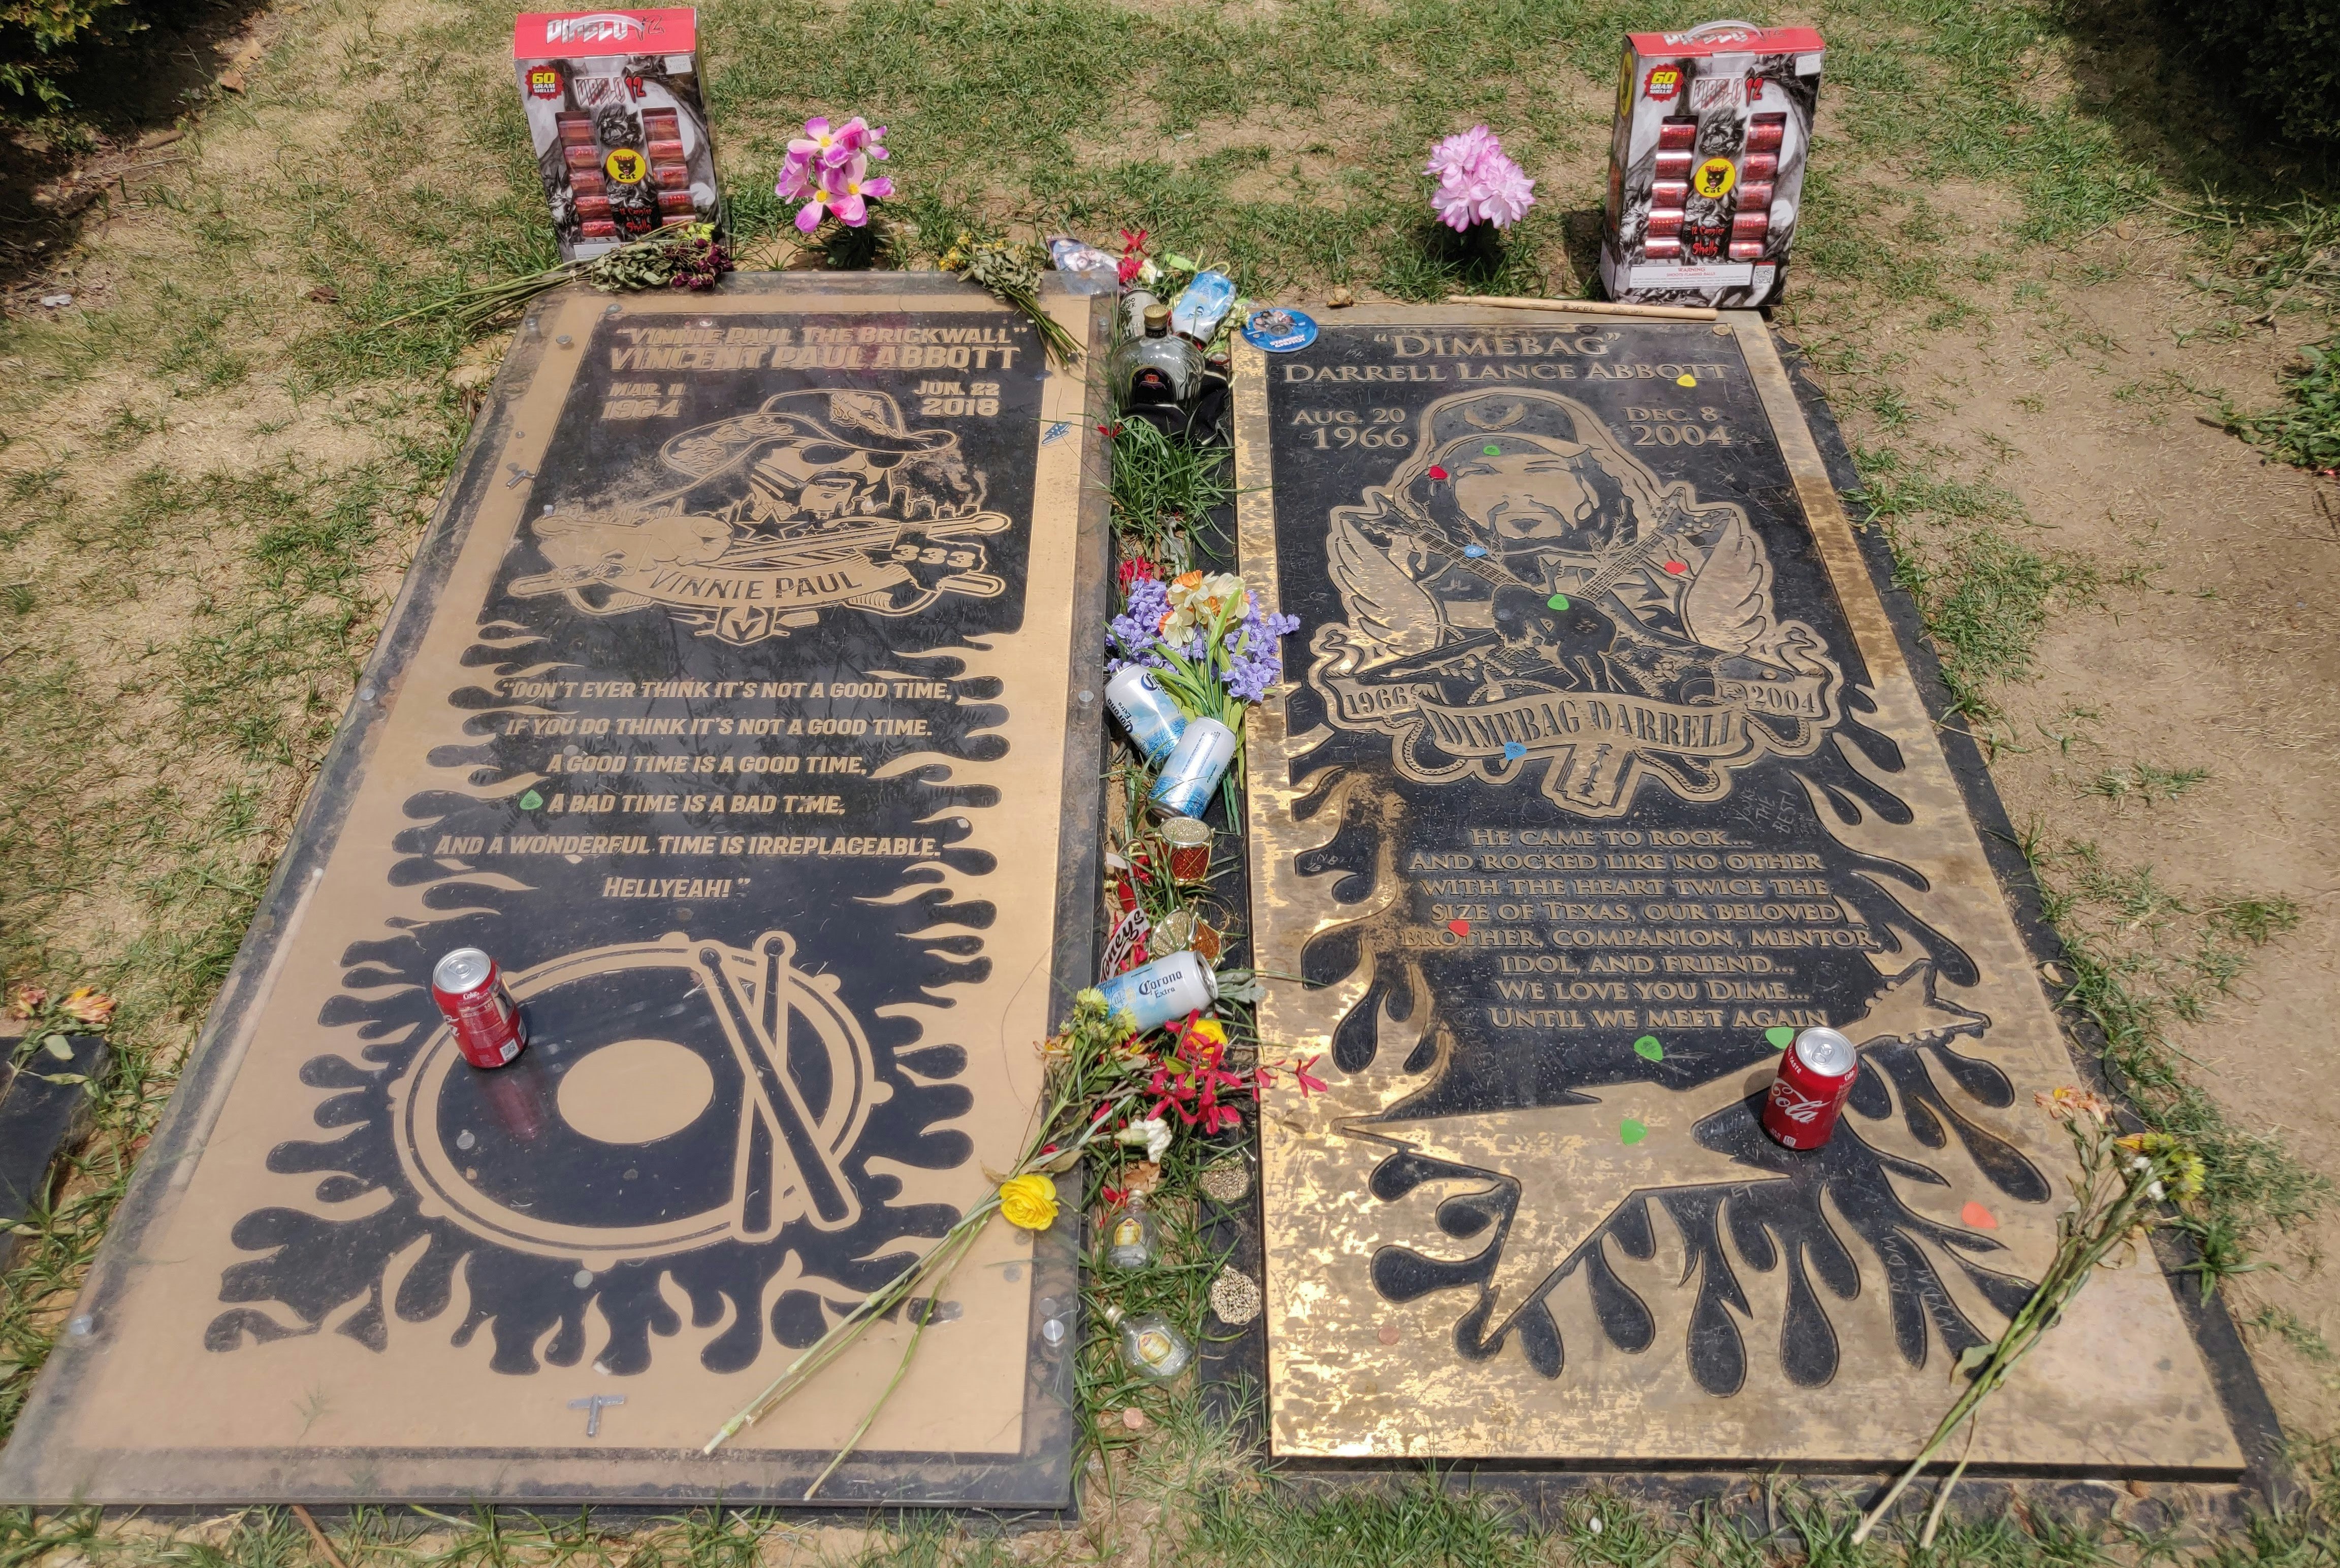 The graves of Darrell ‘Dimebag’ Abbott and his brother, Vinnie Paul, in Arlington, Texas. The two graves, which are large slabs laid into the grass side by side, are littered with beer cans and guitar picks.